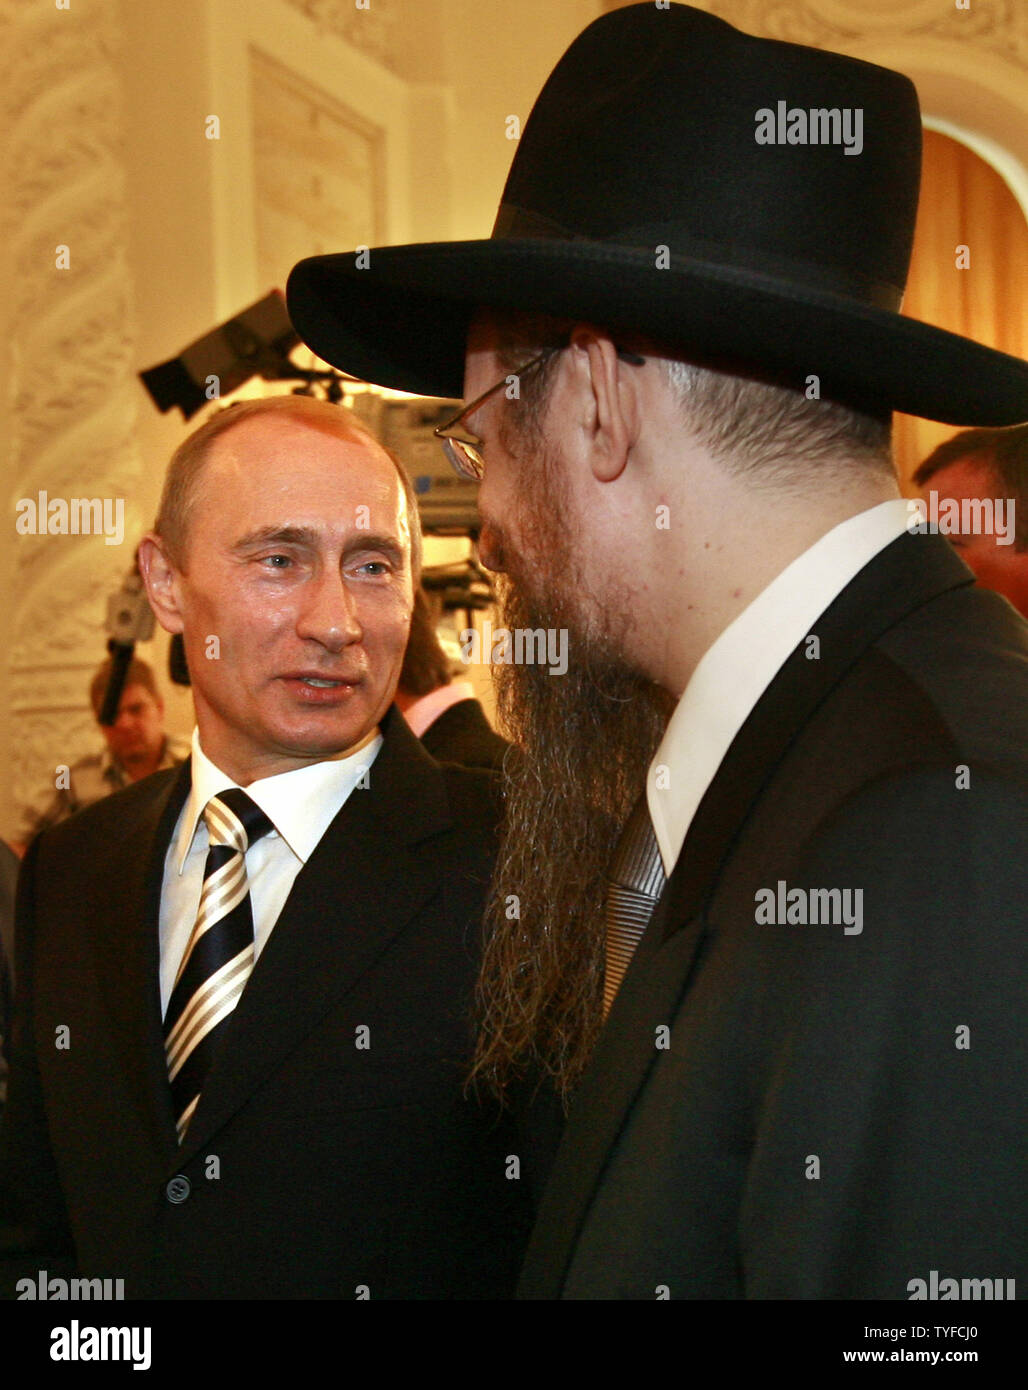 Russian Prime Minister and former president Vladimir Putin attends the State Award ceremony on national independence day in the Kremlin in Moscow on June 12, 2008. (UPI Photo/Anatoli Zhdanov) Stock Photo